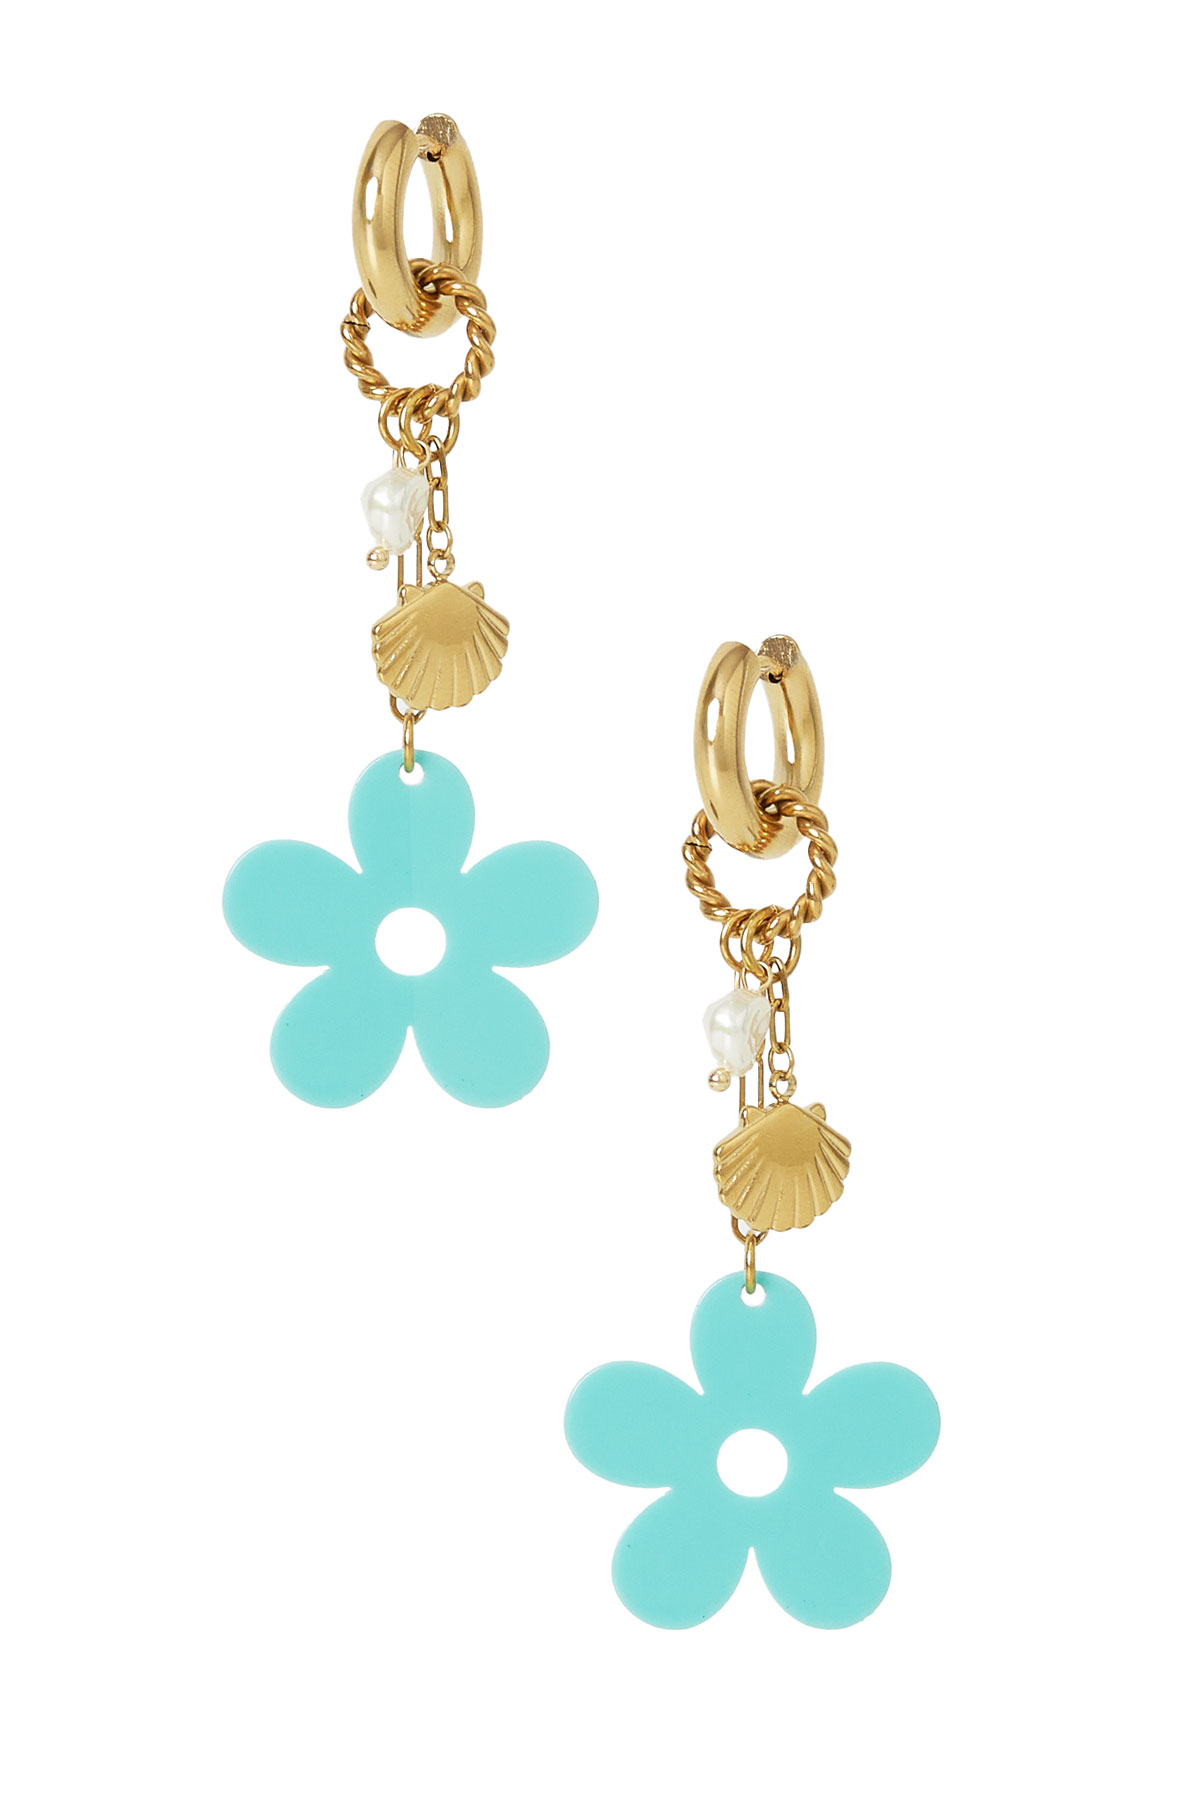 Earrings floral mood - blue gold